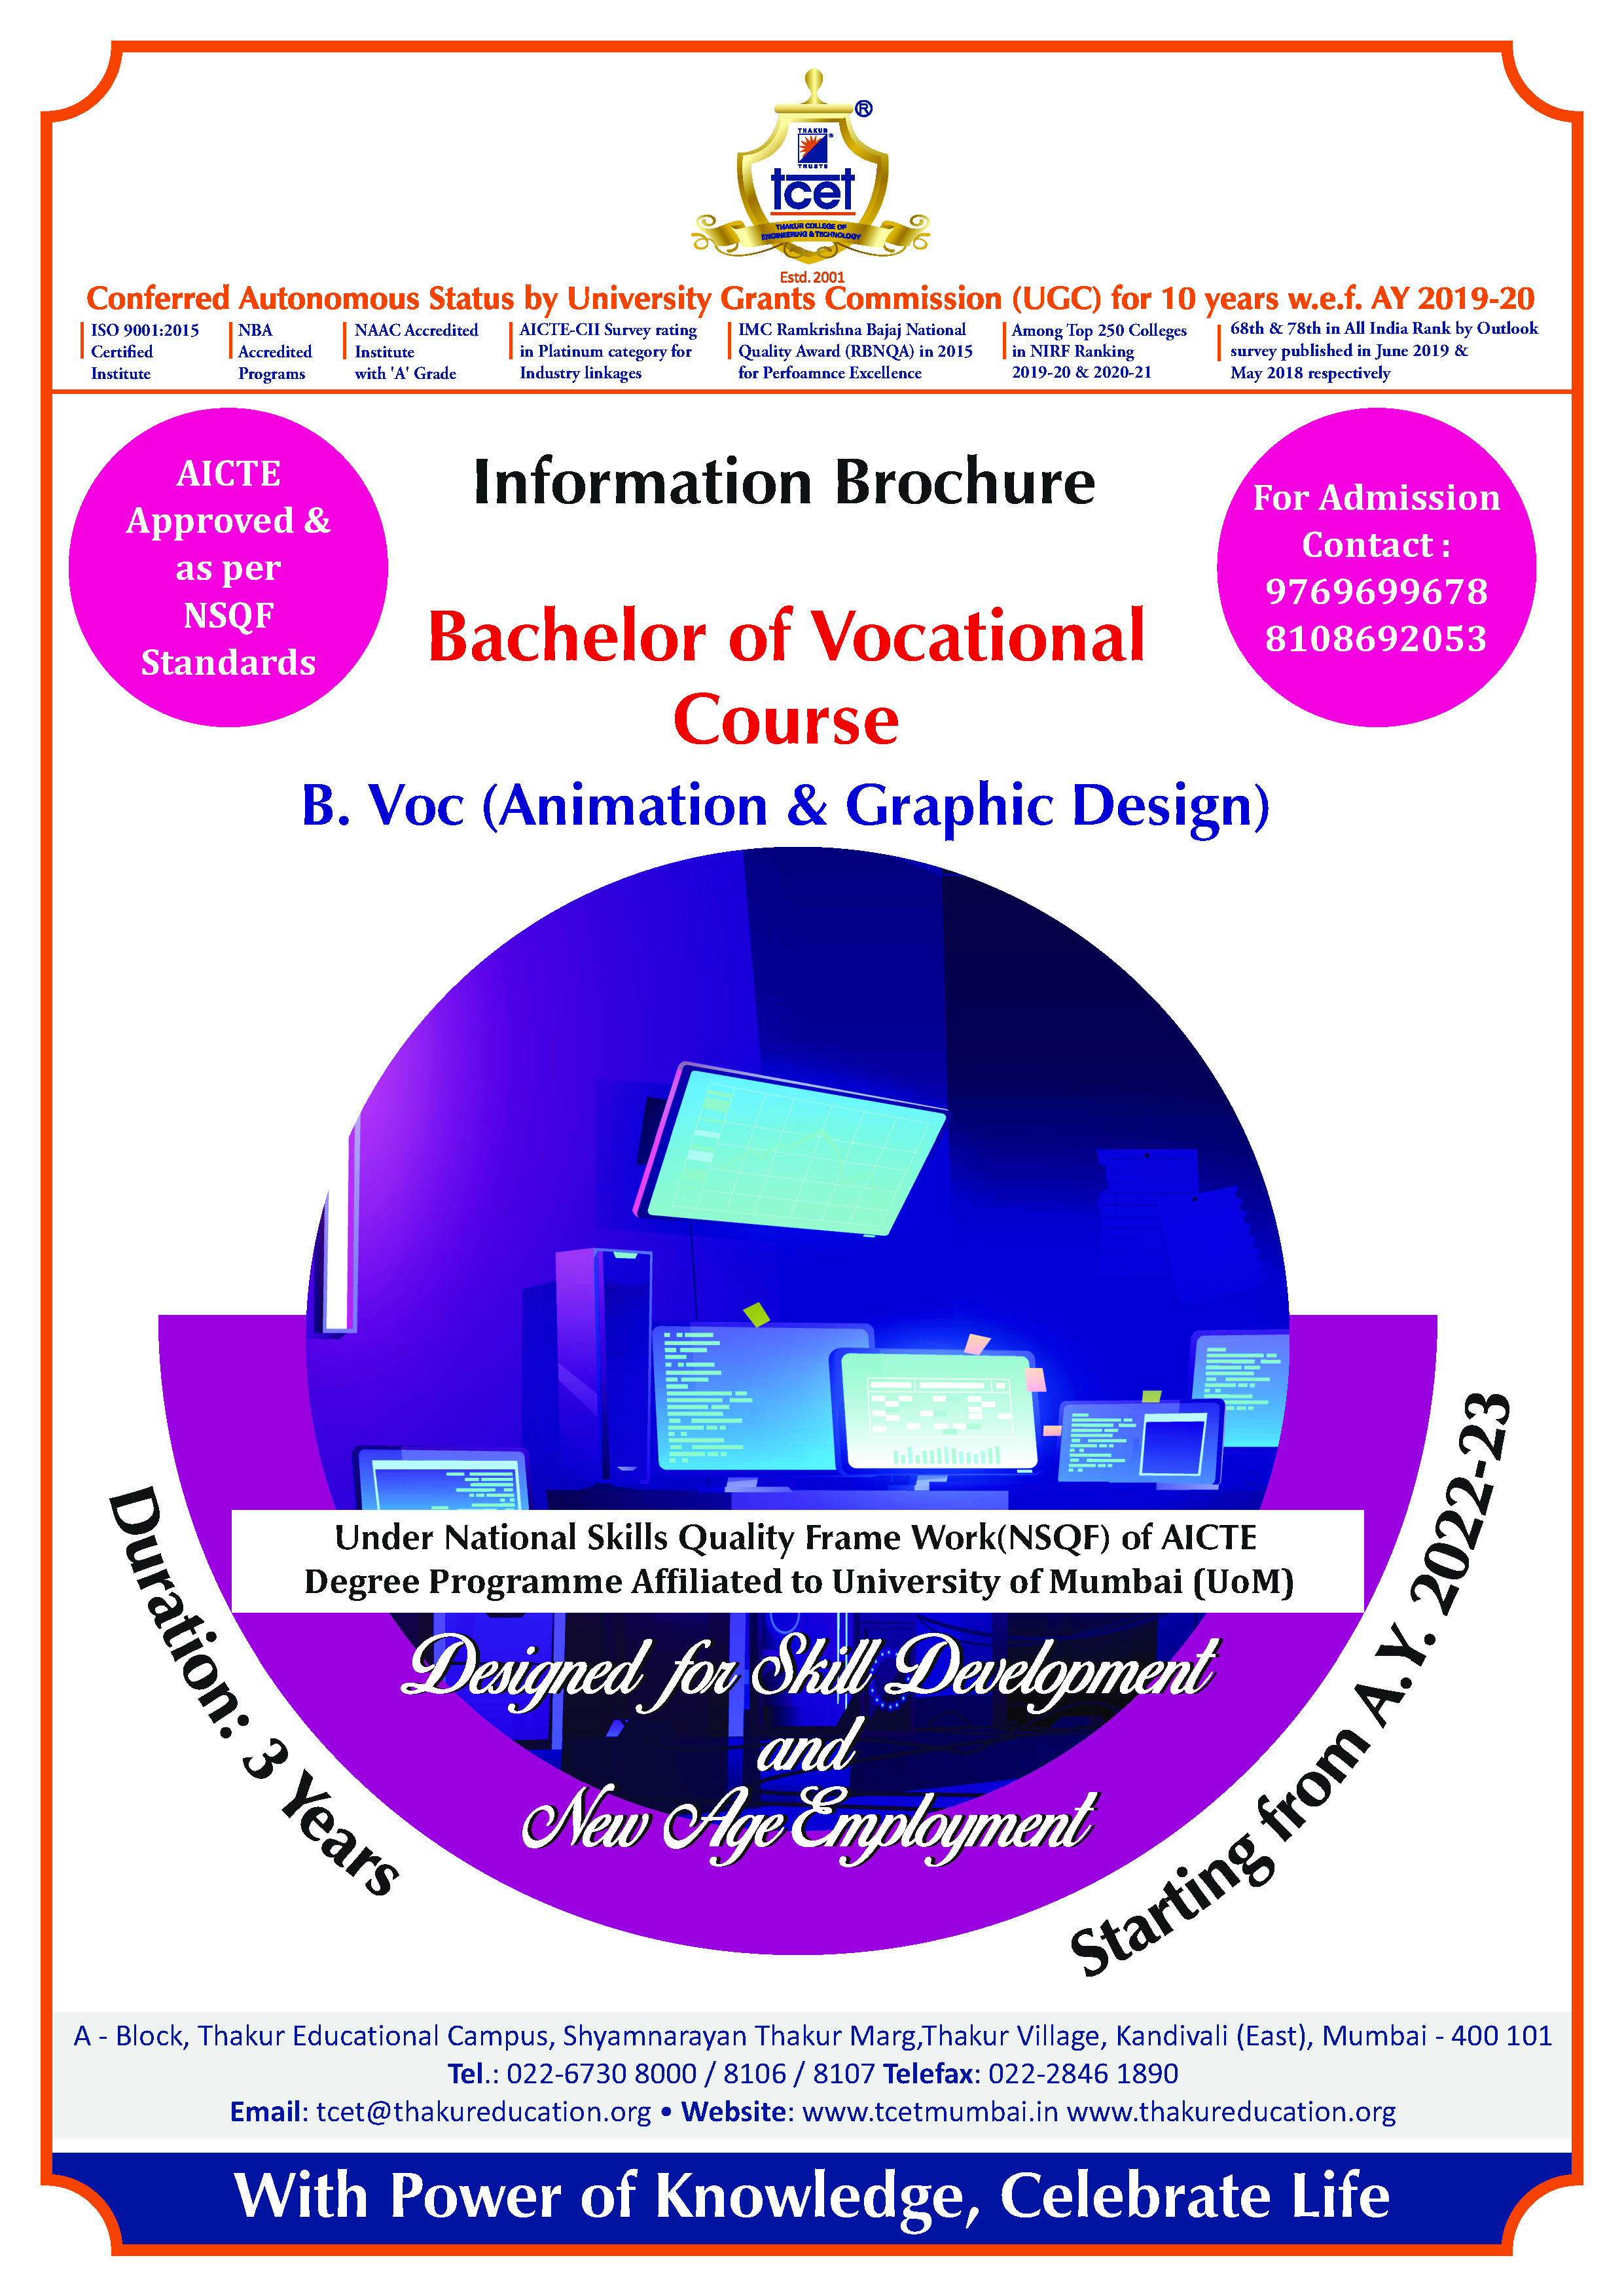 TCET - Thakur College Of Engineering and Technology